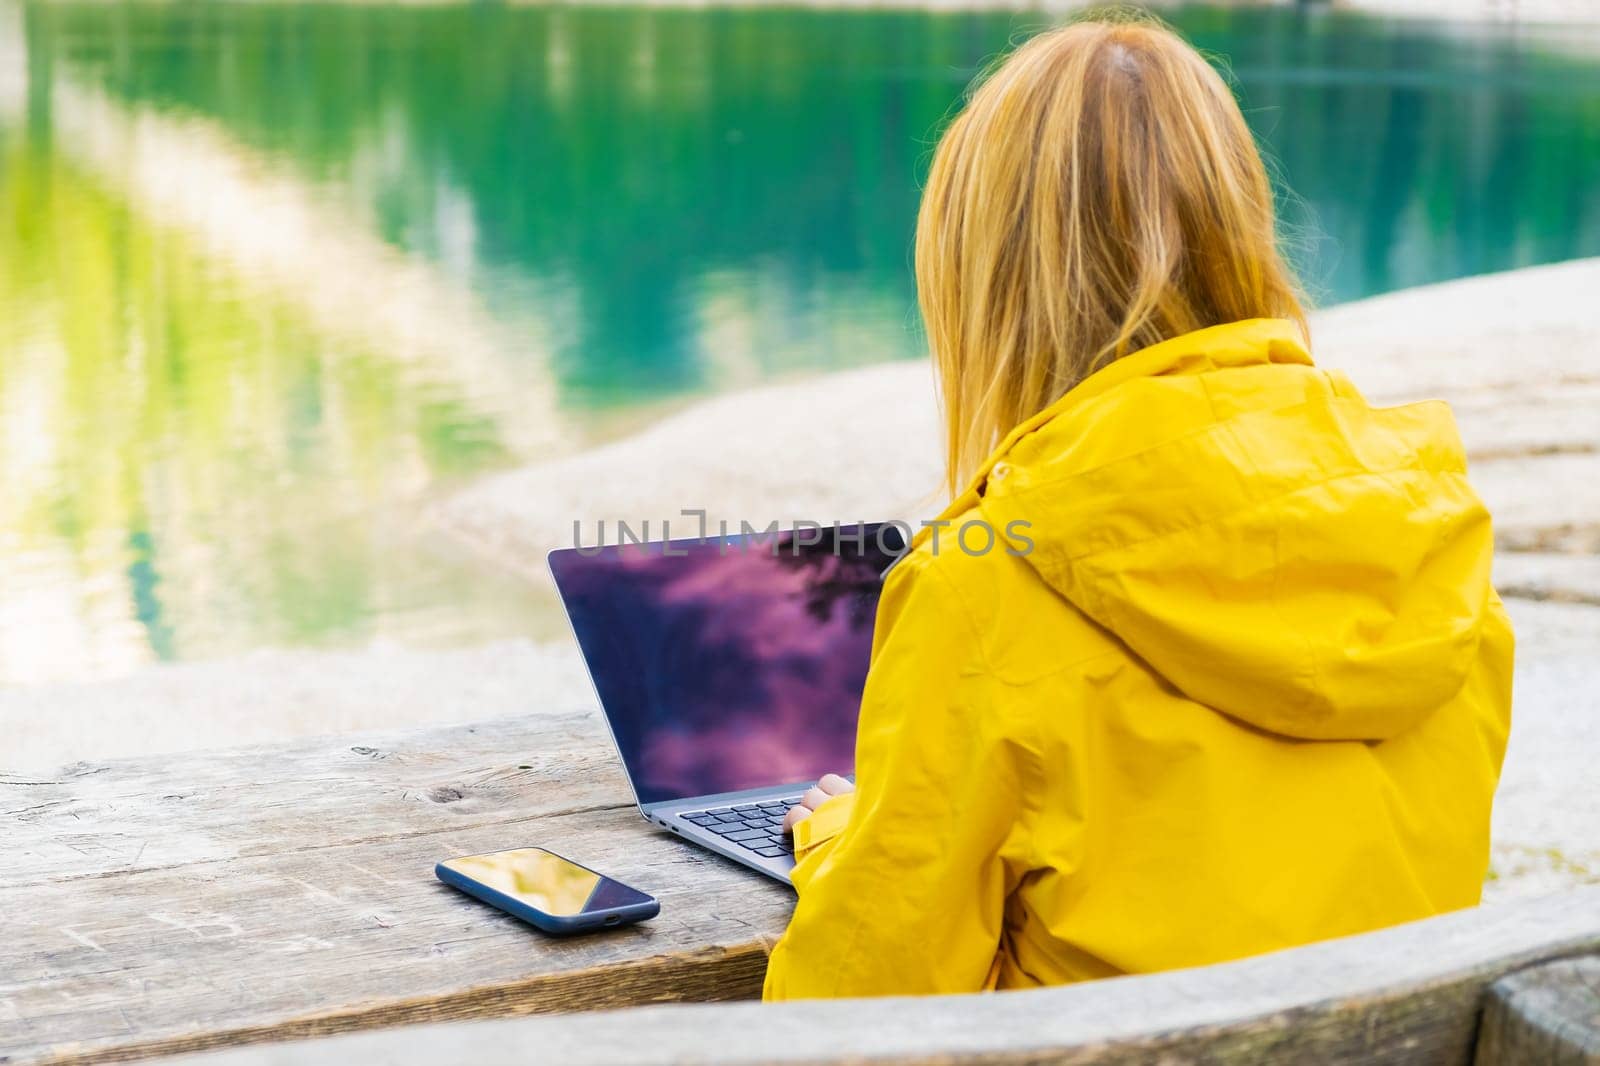 The girl is focused on working at a computer in nature with a beautiful view of the mountains and the lake. Freelancer works remotely from the office in sunny day.